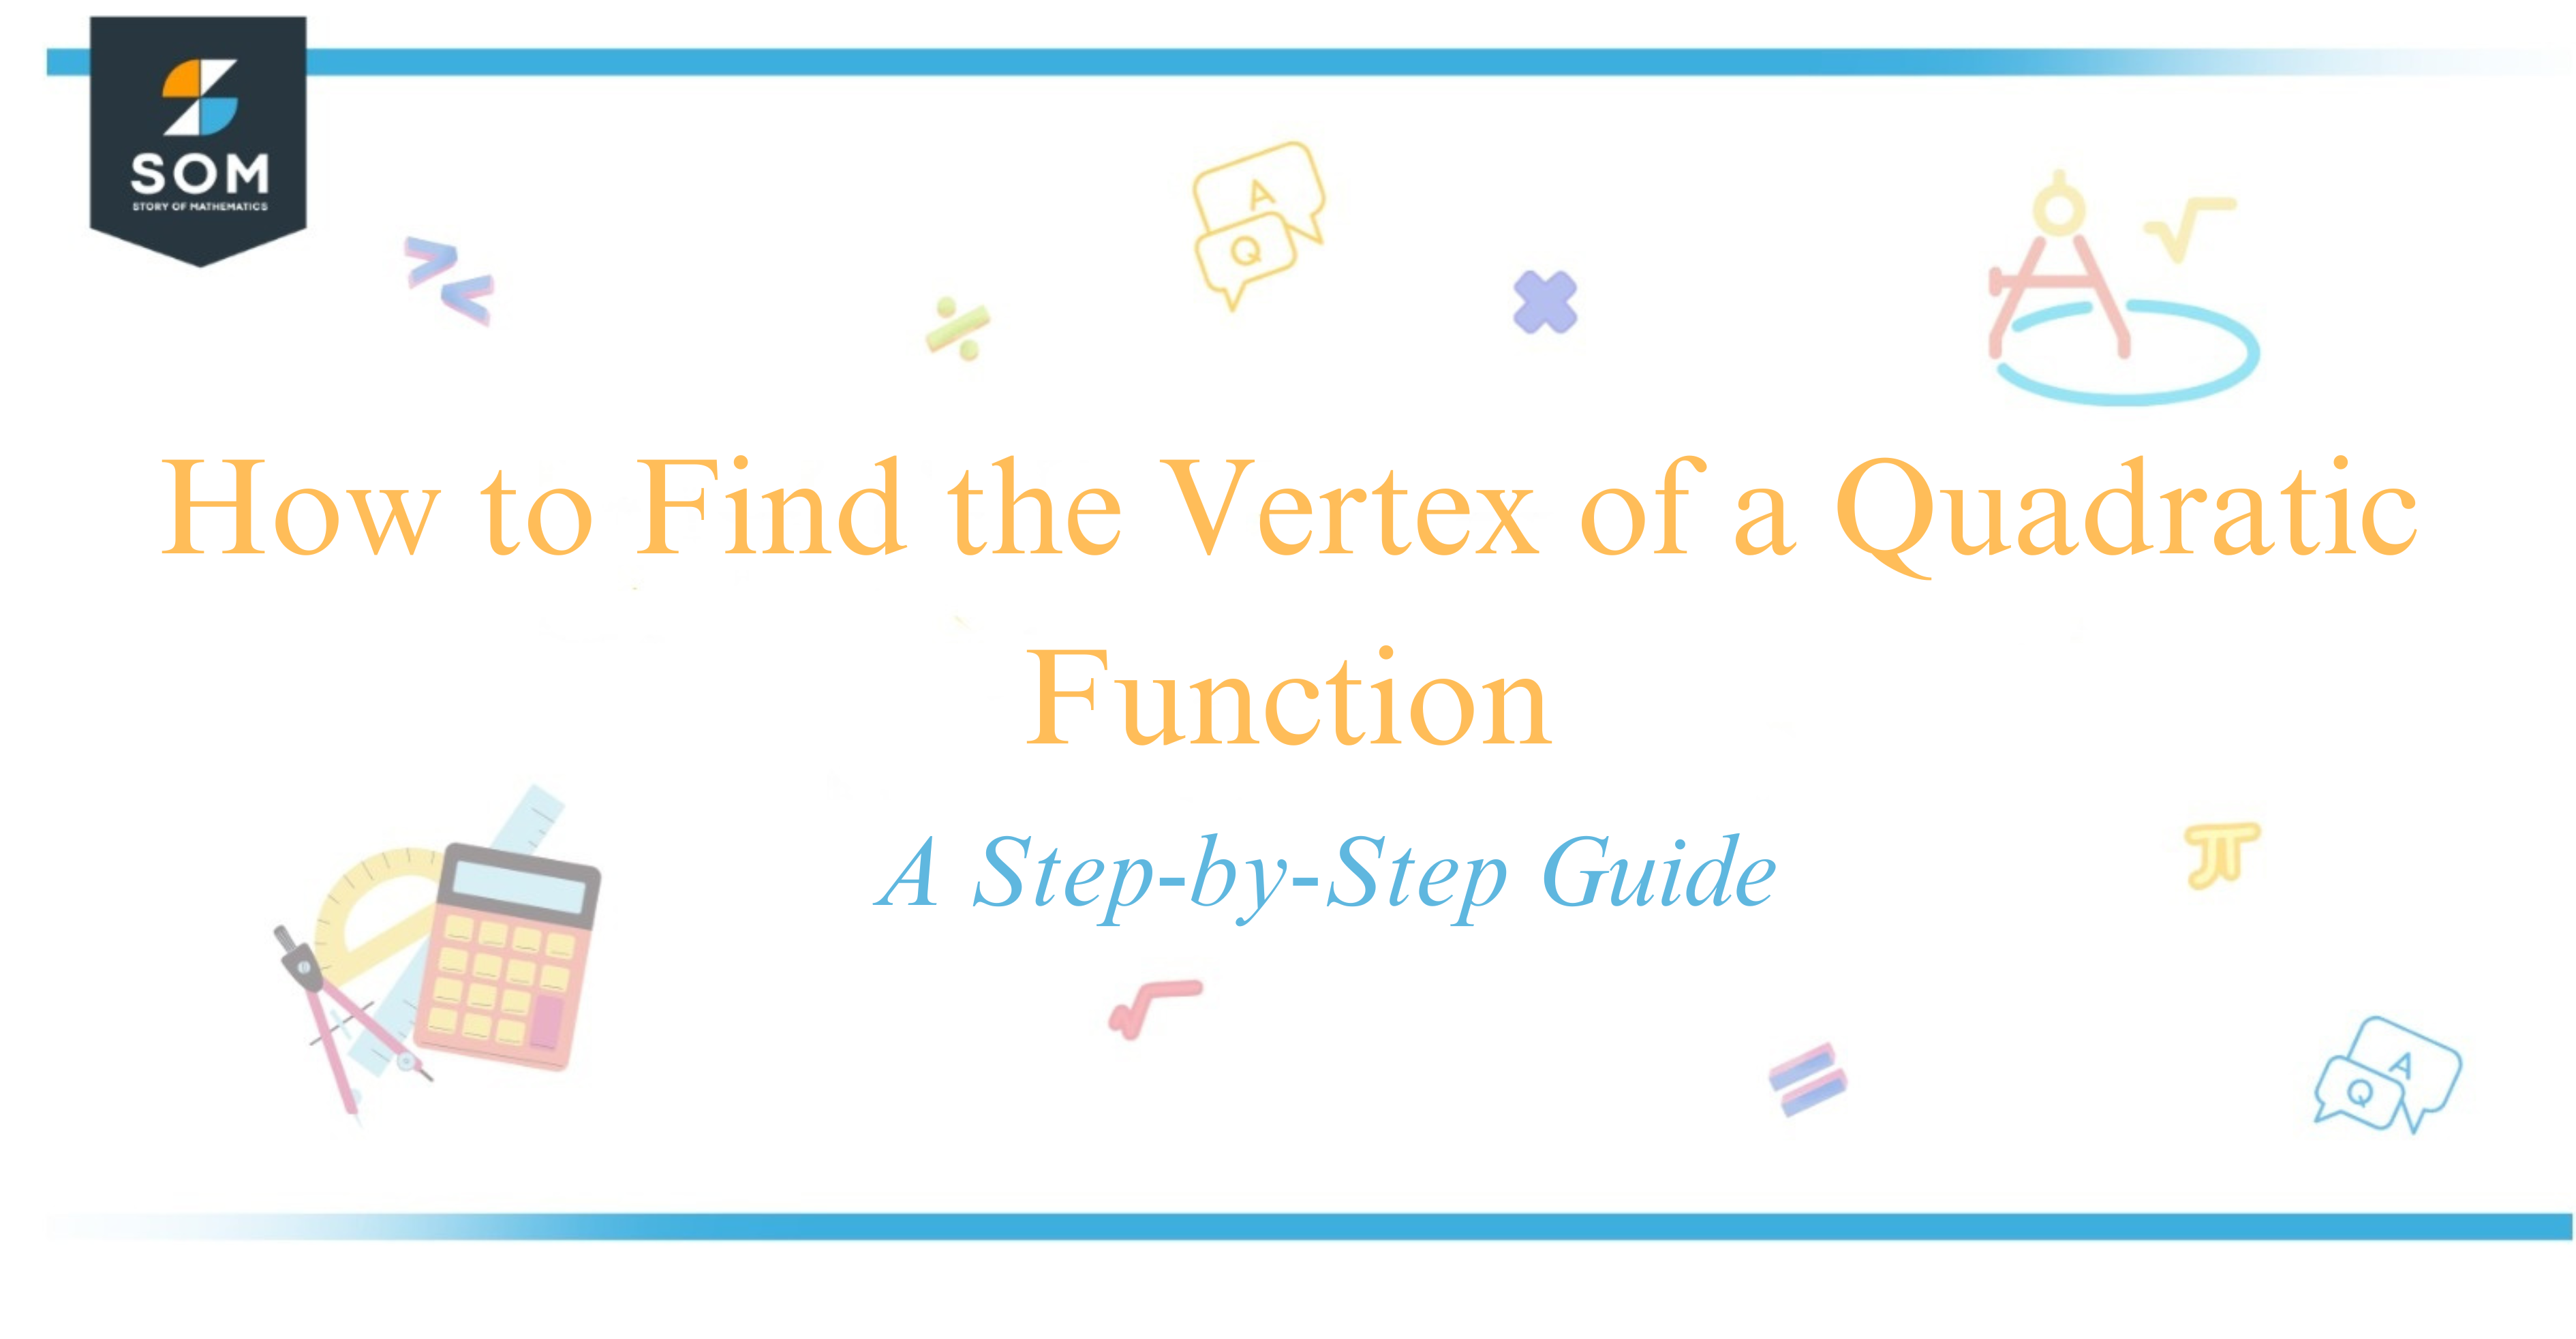 How to Find the Vertex of a Quadratic Function A Step-by-Step Guide